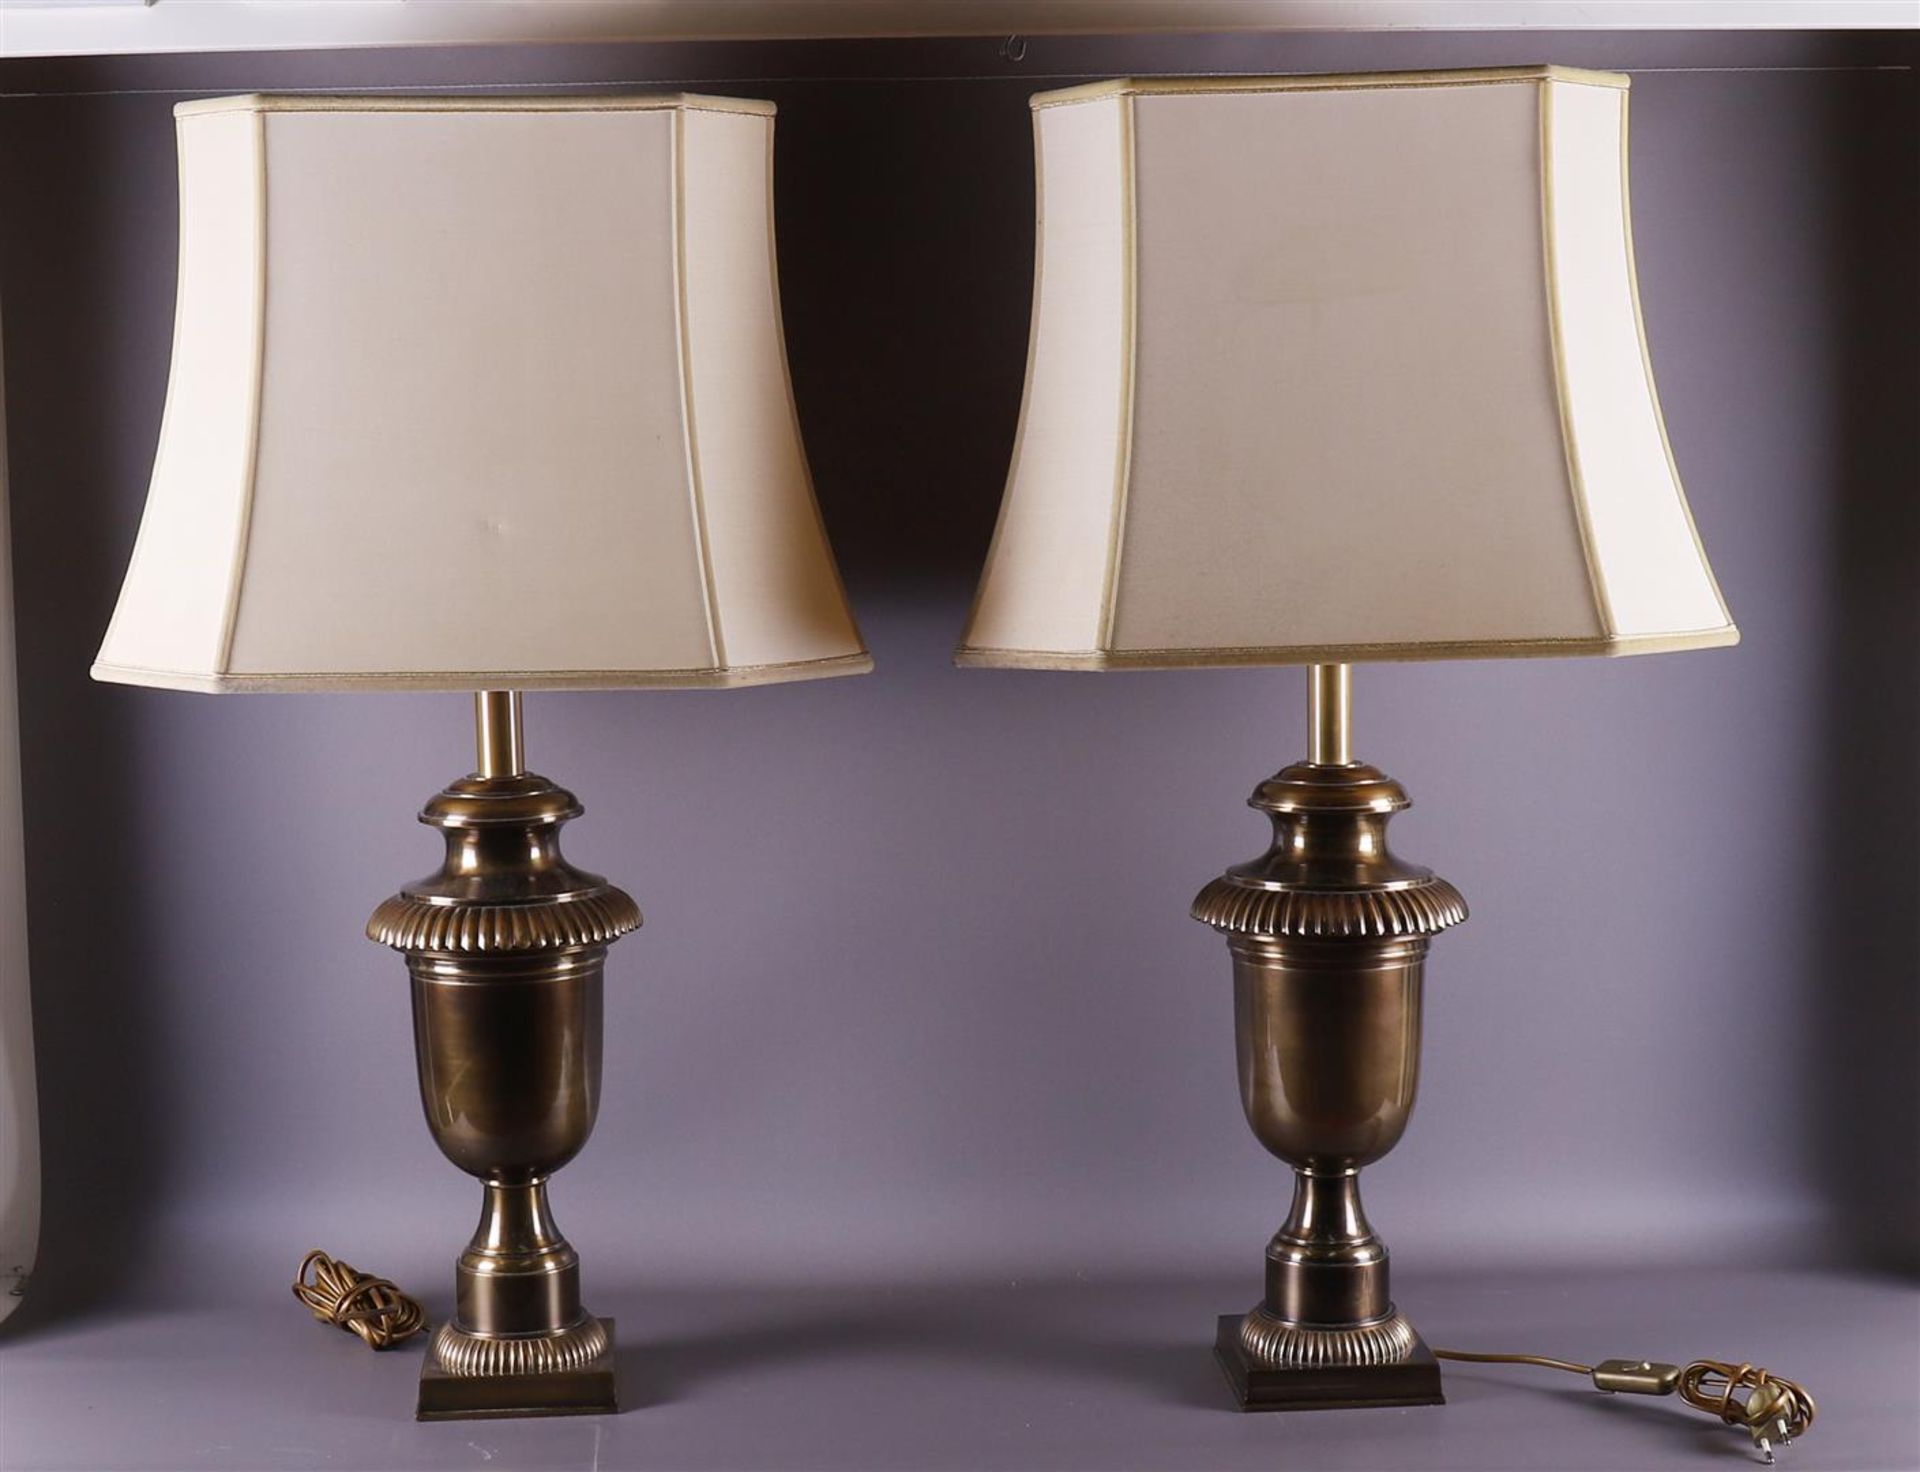 A pair of baluster-shaped bronze lamp bases with fabric lampshades, 20th century